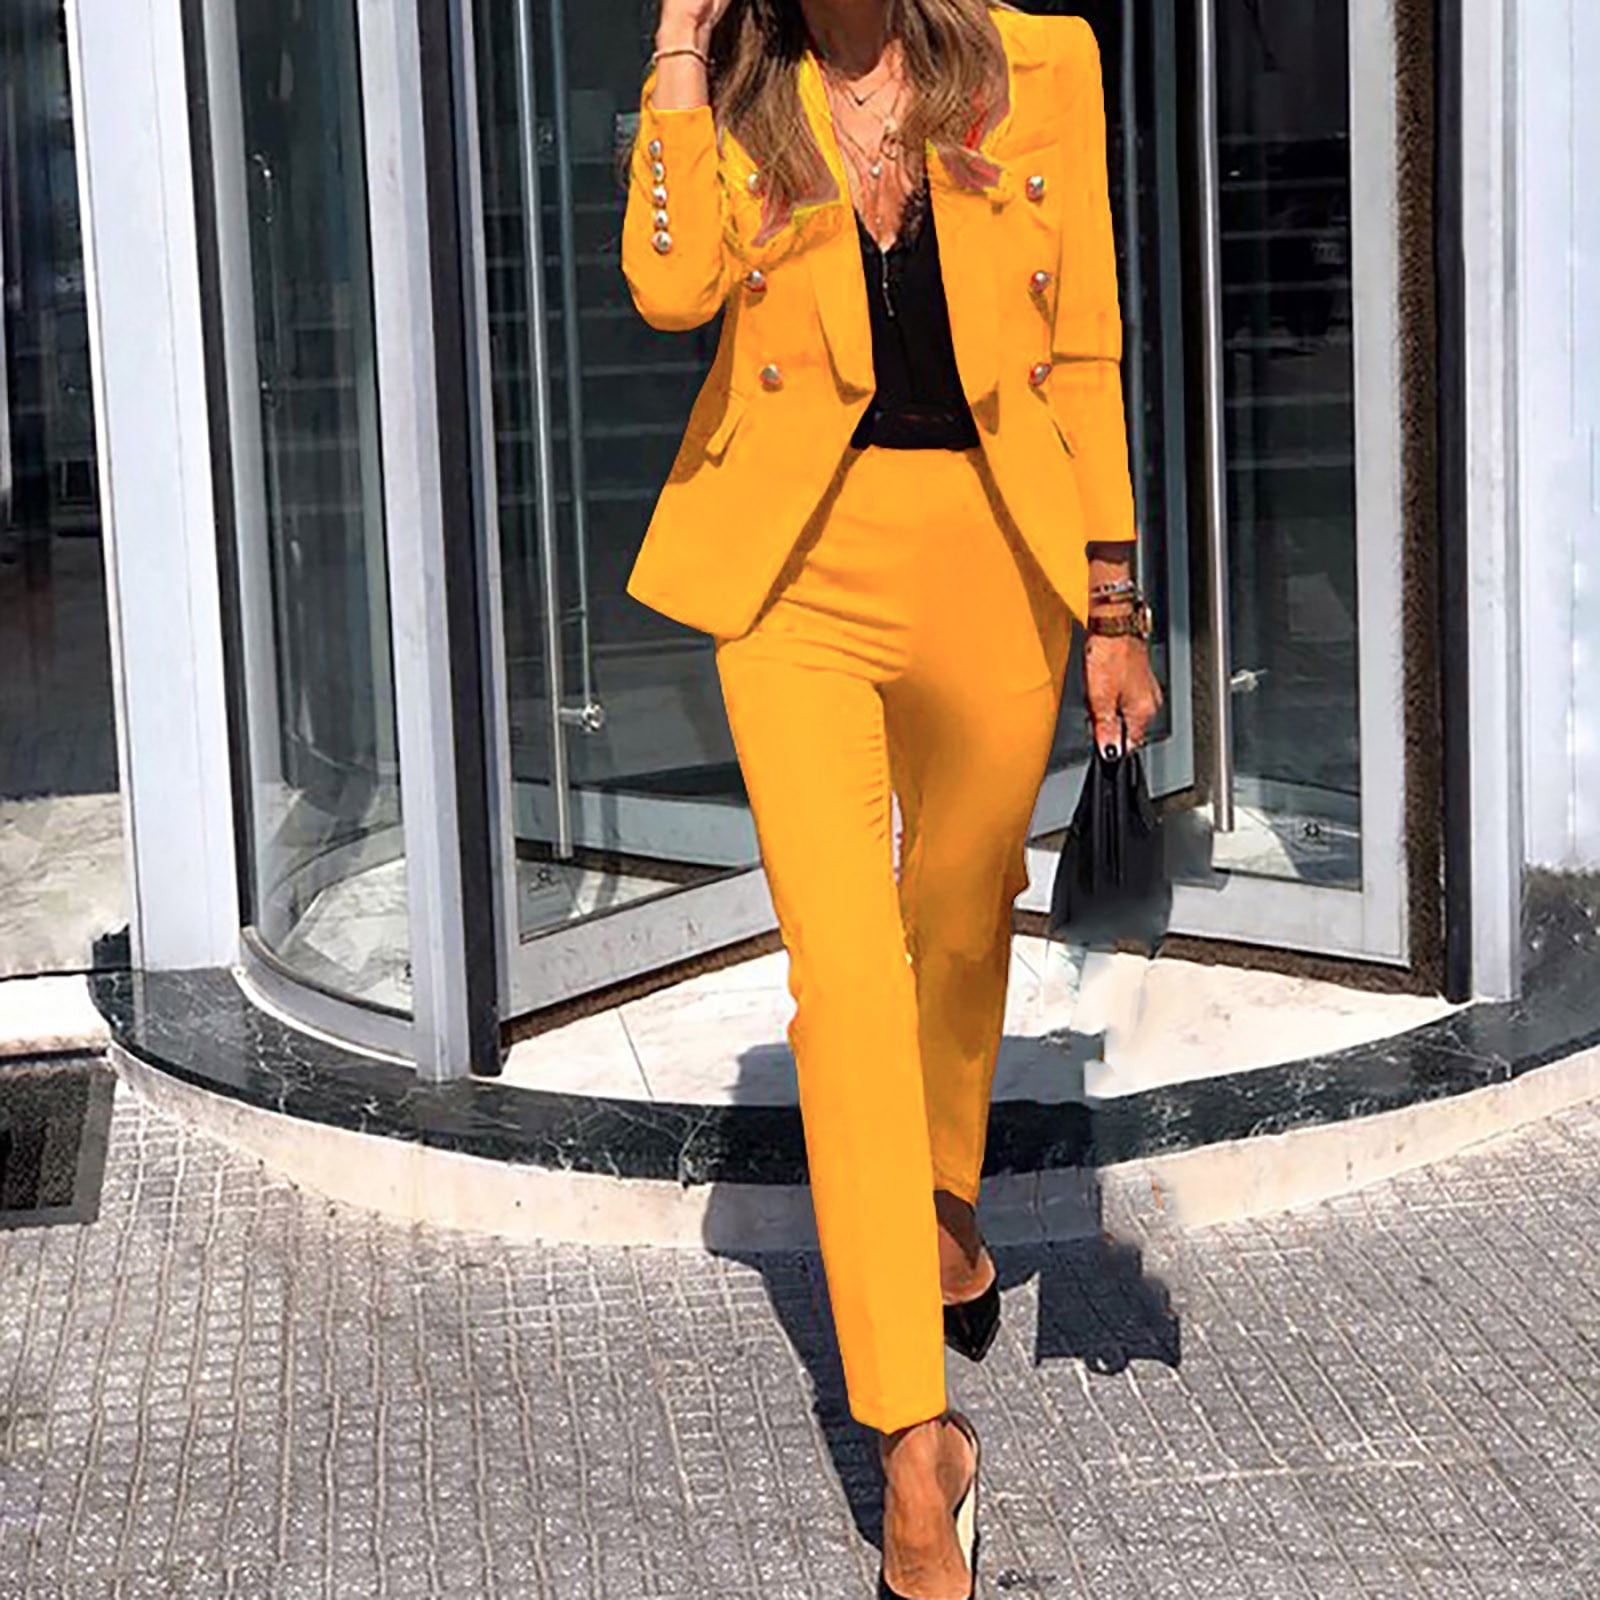 Womens Two Piece Outfits Blazer Pants Suits Party Clubwear Sexy Long Sleeve  Elegant Business Suit Sets 2 Piece